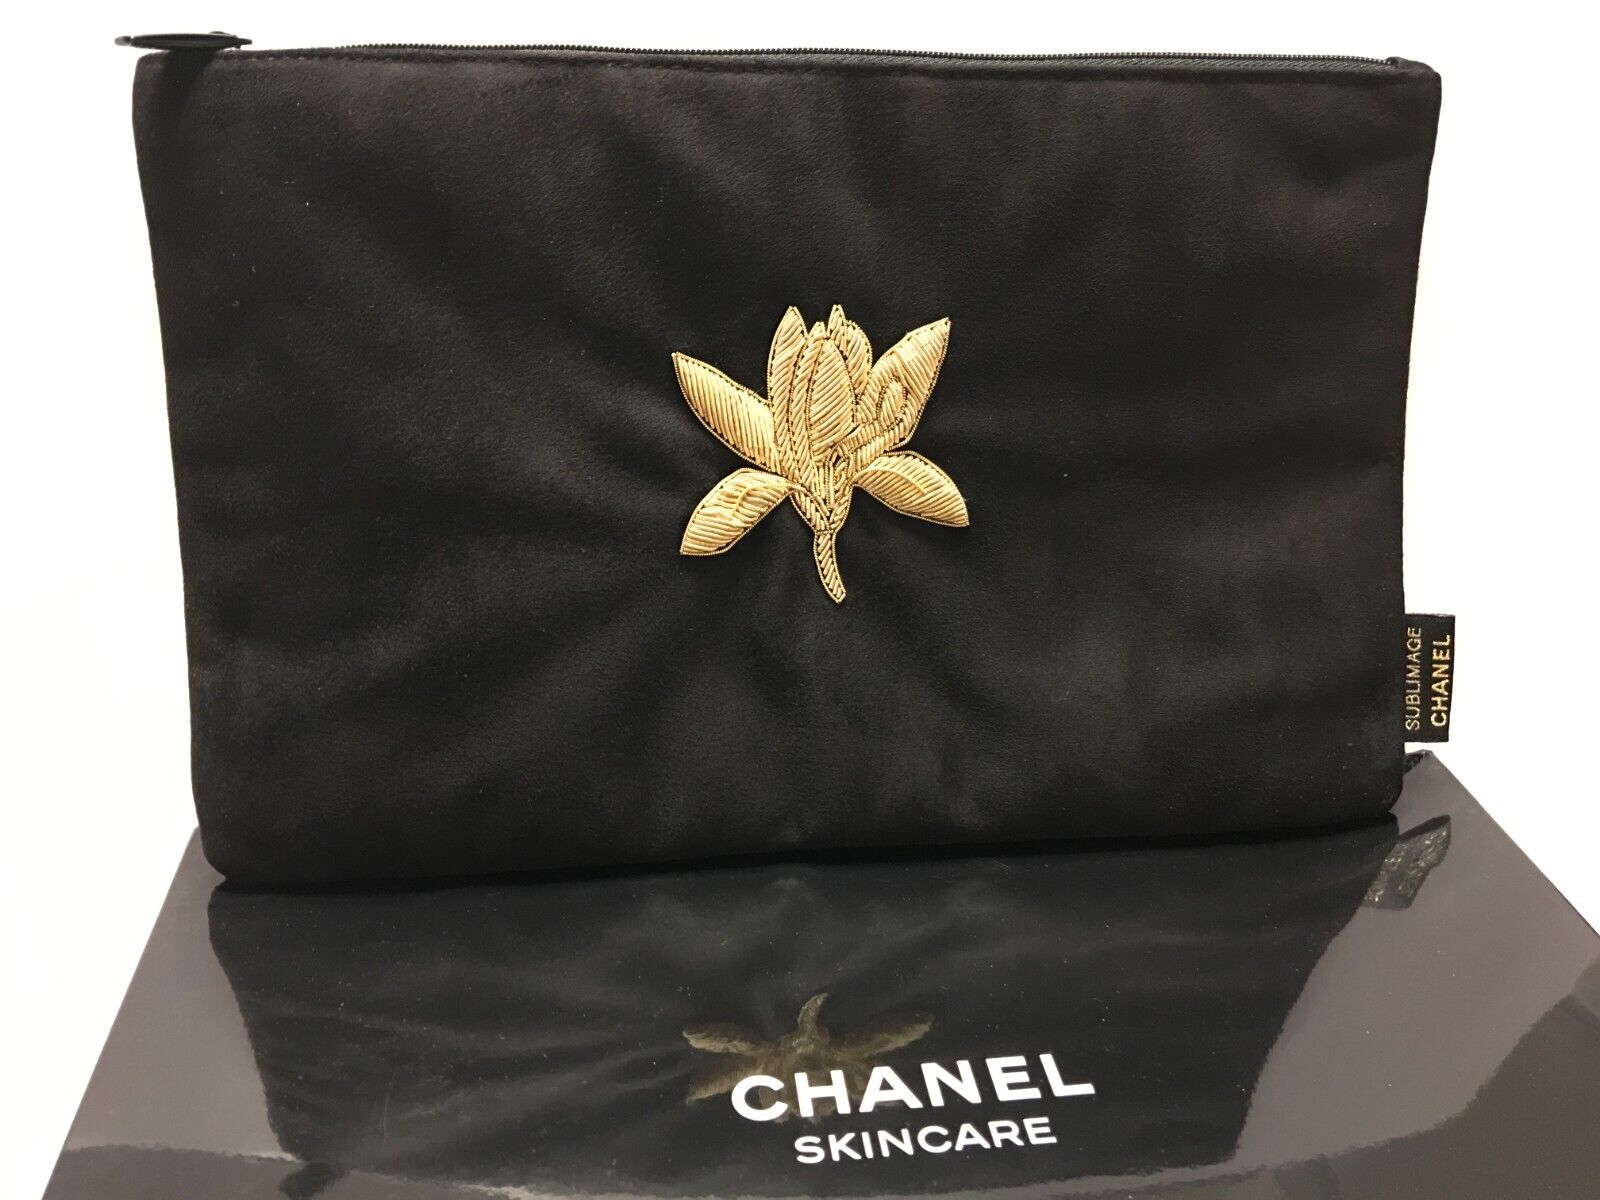 CHANEL BEAUTY Embroidered Cosmetic Bag Makeup Clutch Pouch VIP Gift NIB